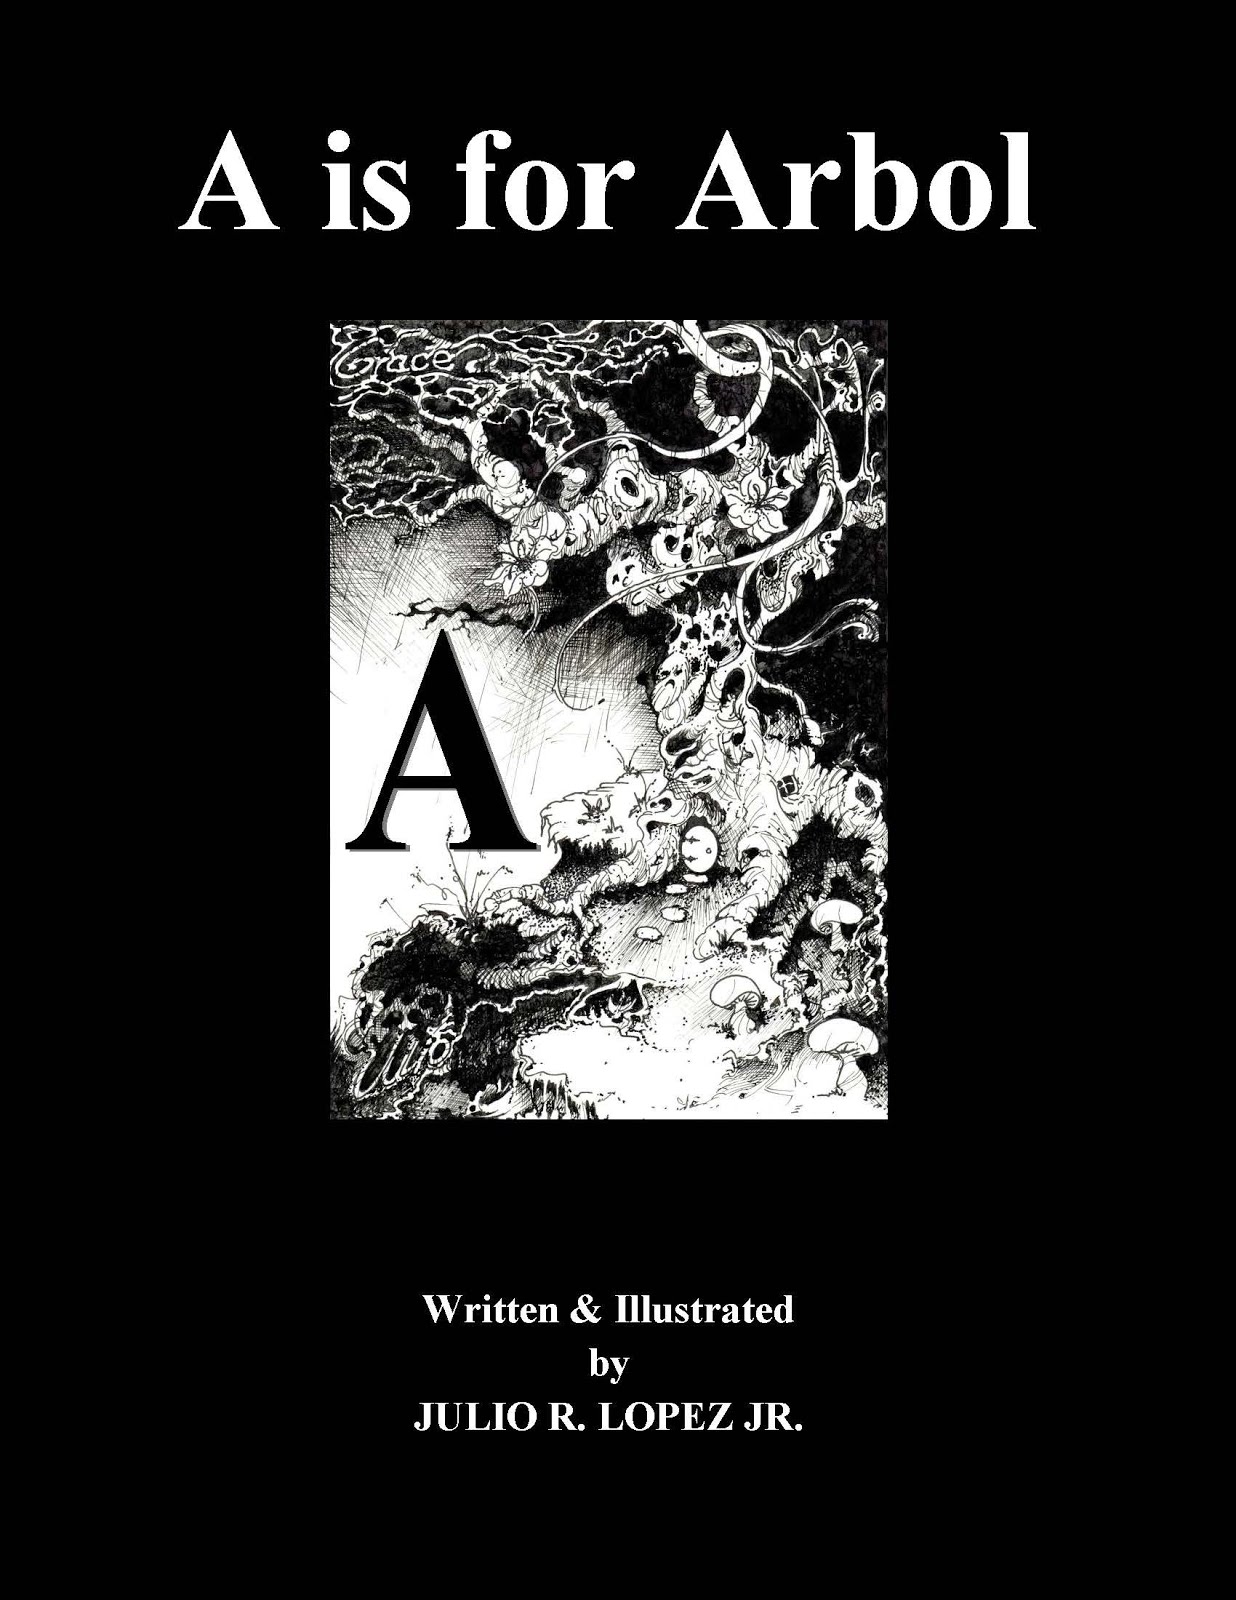 A IS FOR ARBOL